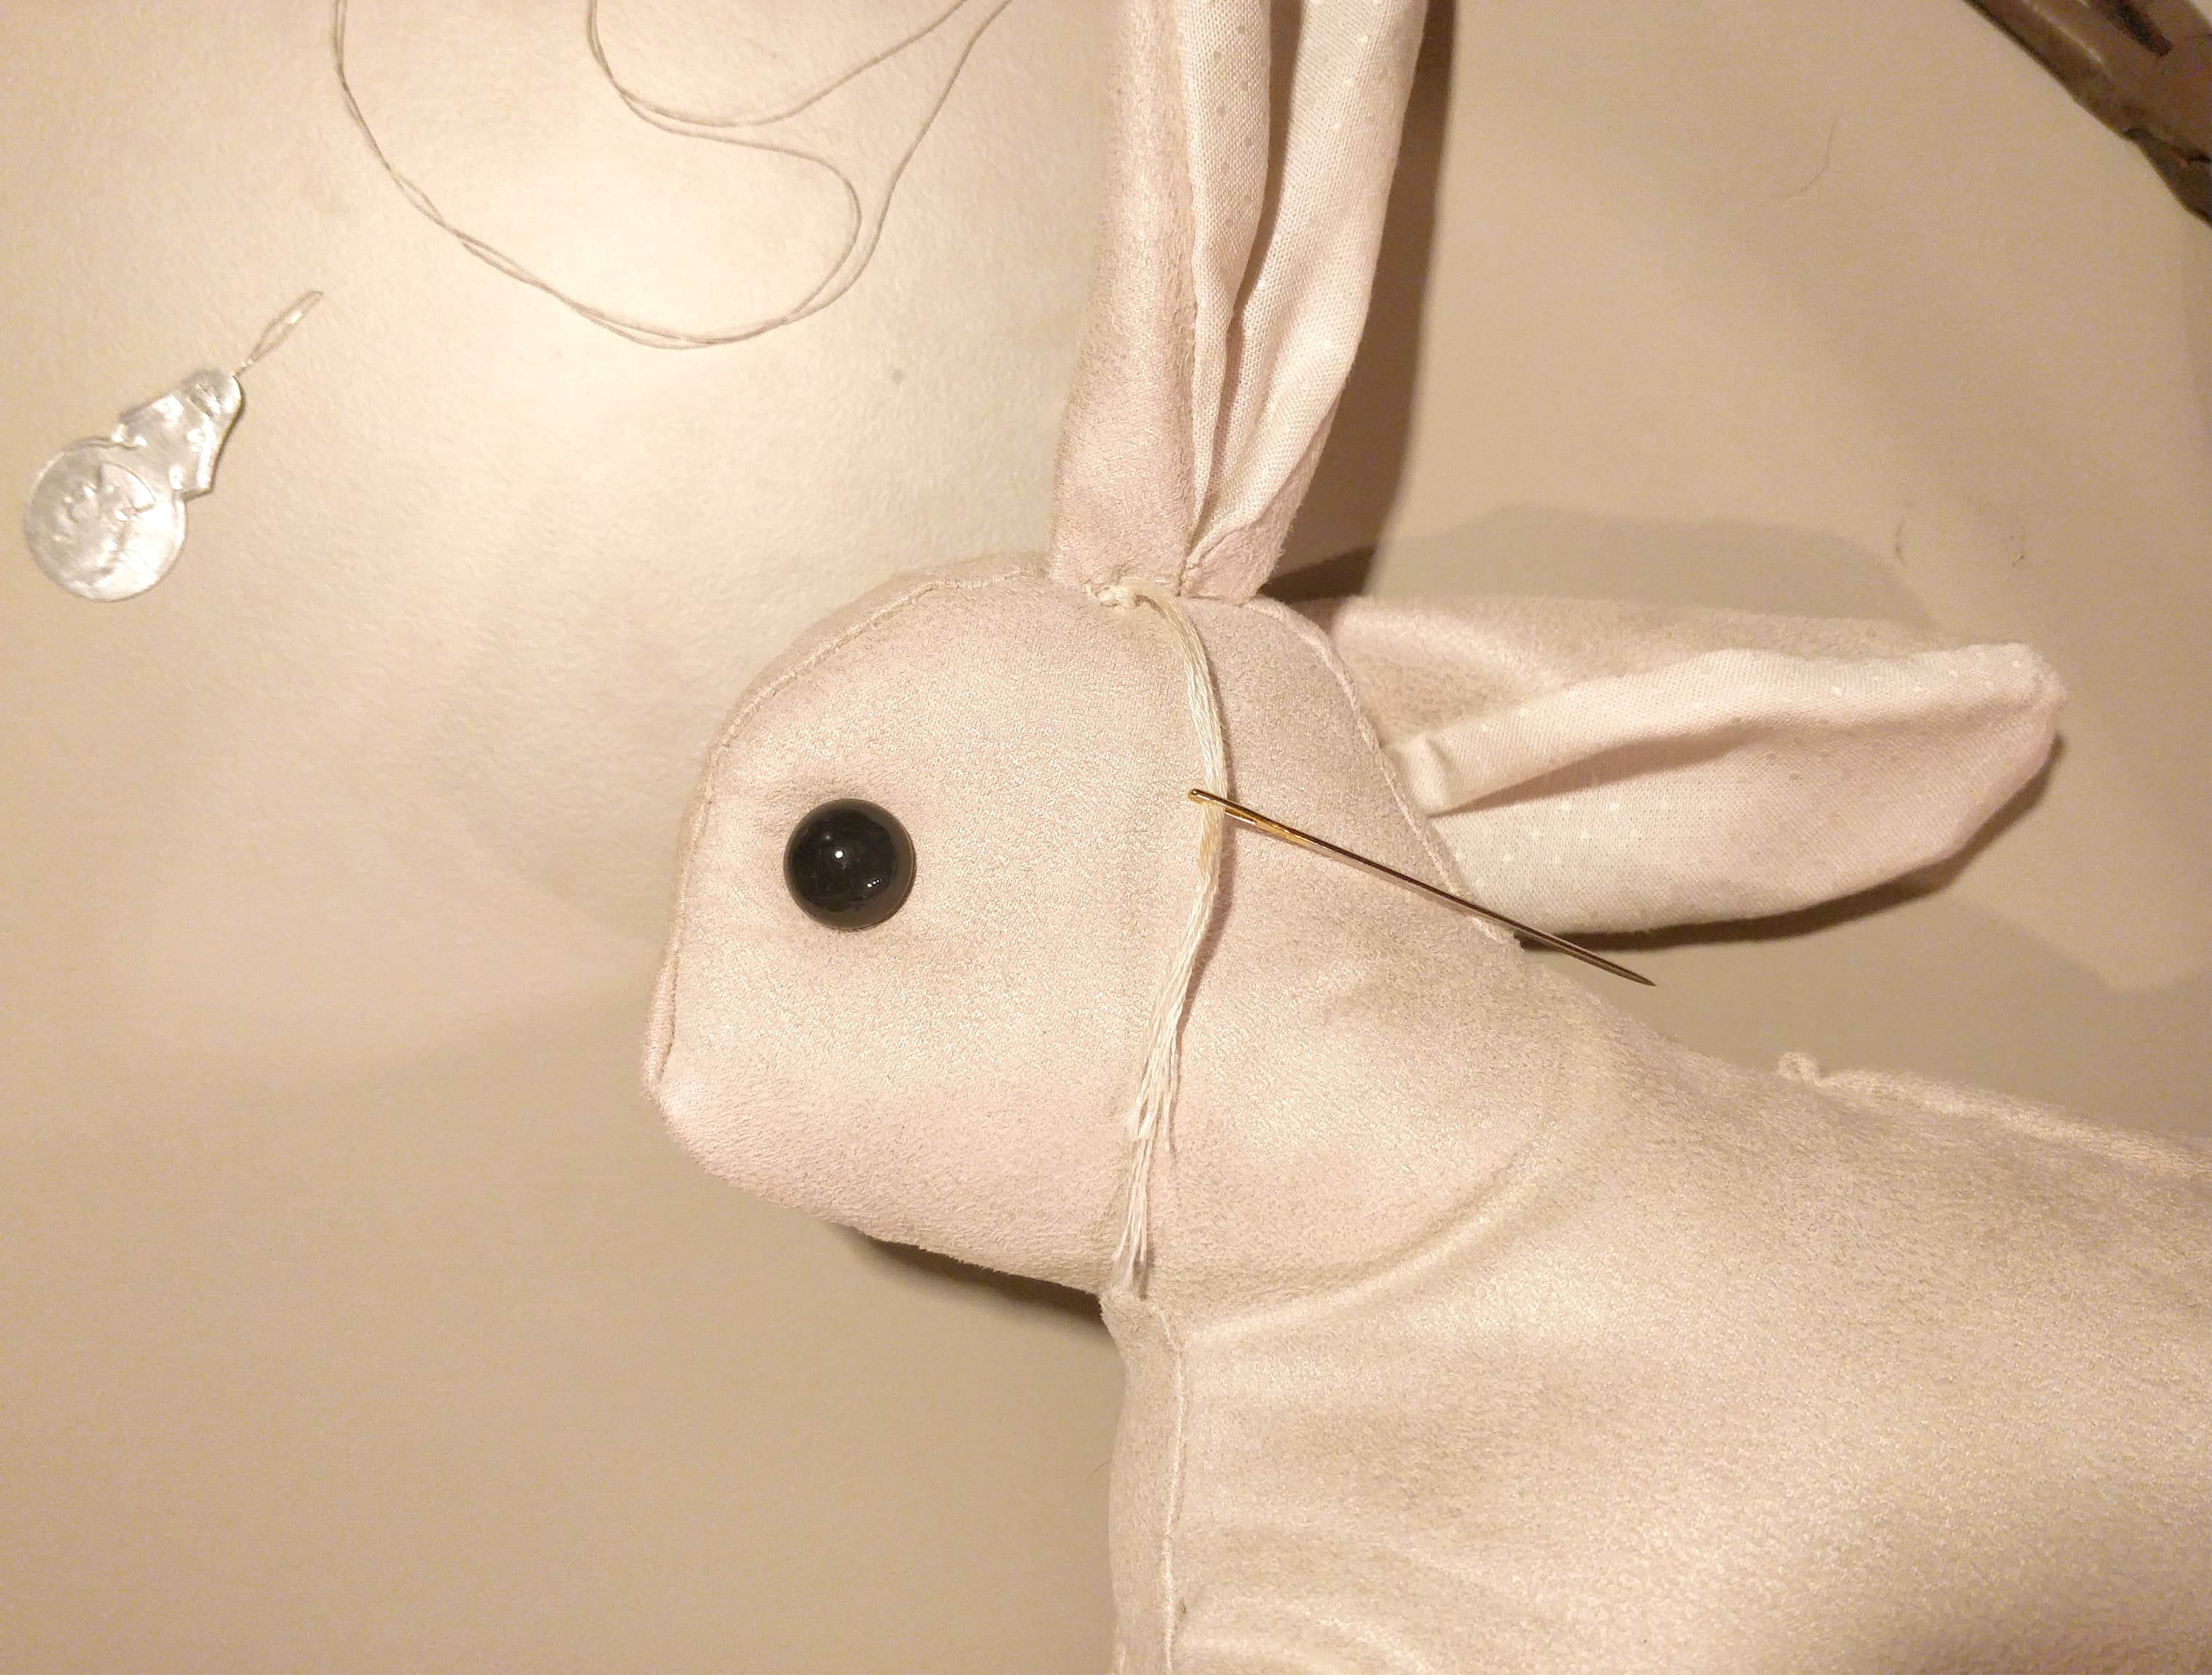 The rabbit's glass eyes are held pretty securely in place using embroidery thread that ties them together through the head, and tied off under the ear.